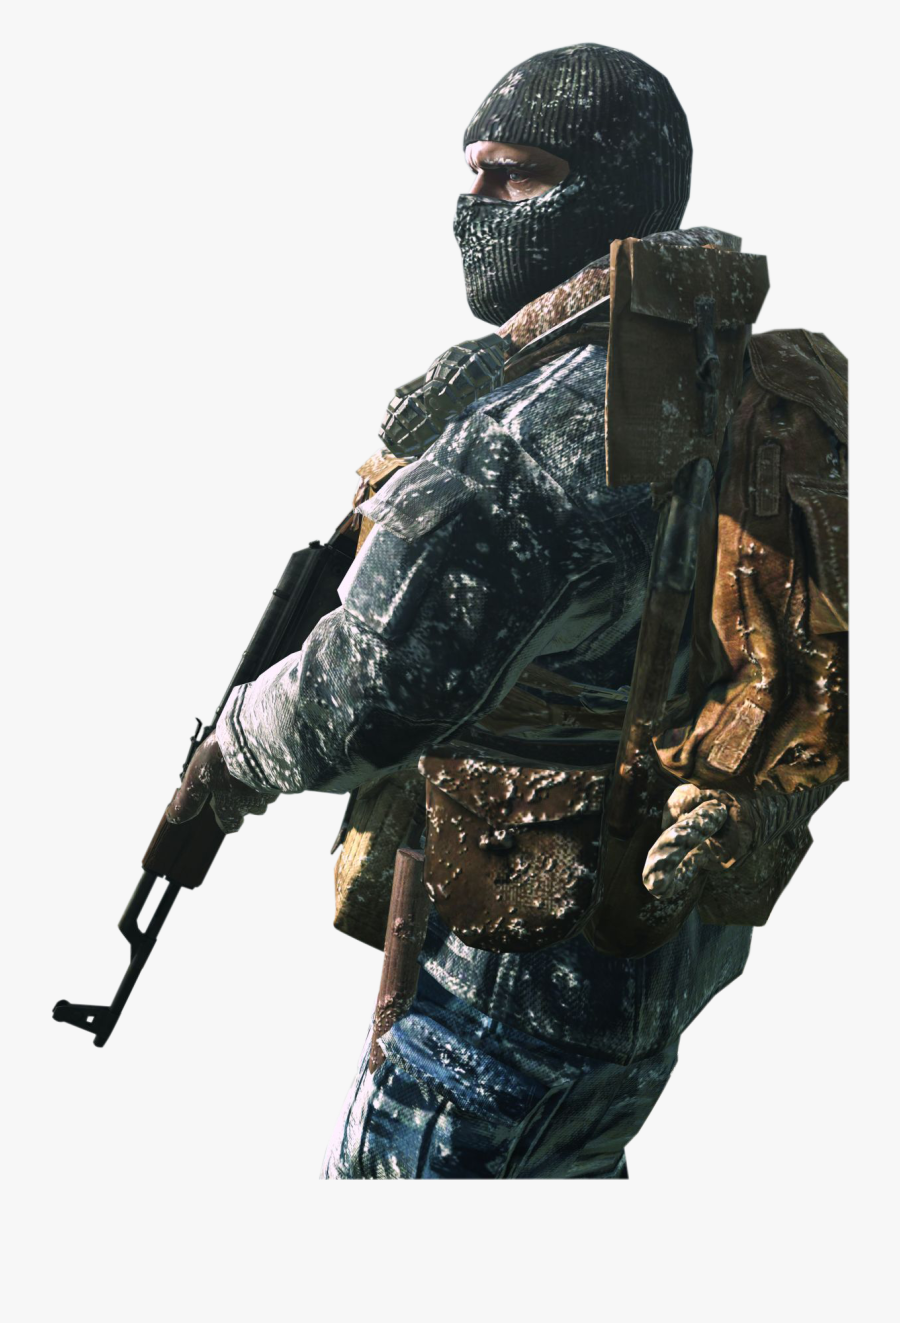 Call Of Duty Png Transparent Images - Call Of Duty Png, Transparent Clipart